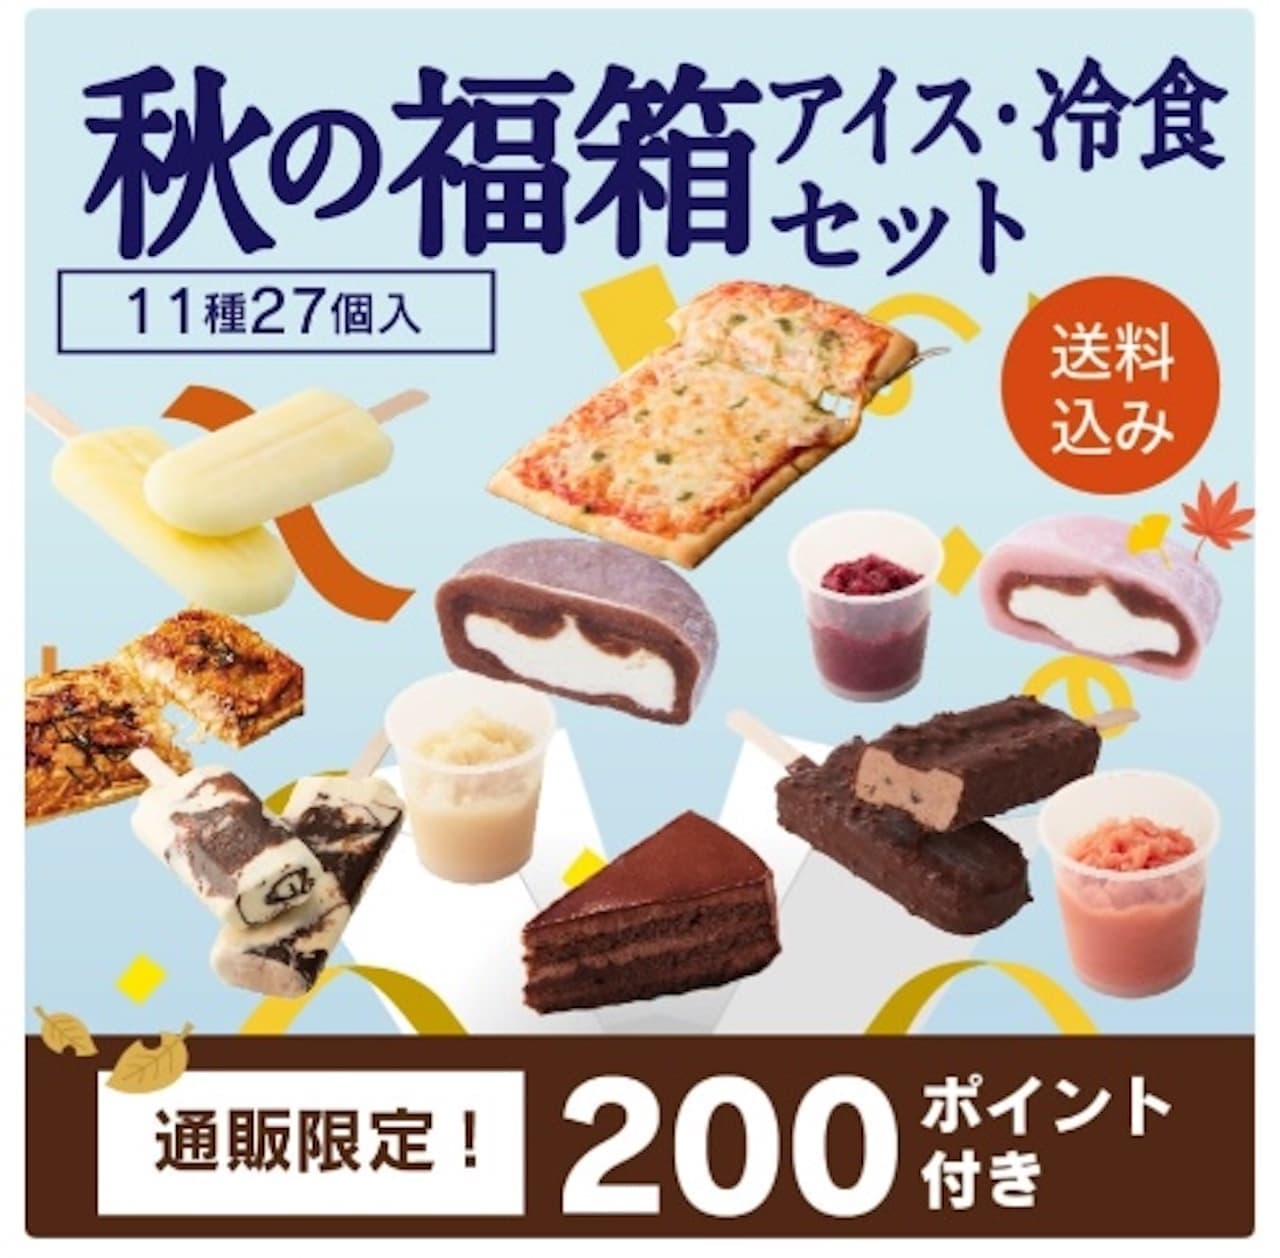 Autumn Lucky Box - Ice Cream and Cold Food Set - 27 pieces of 11 kinds, shipping included